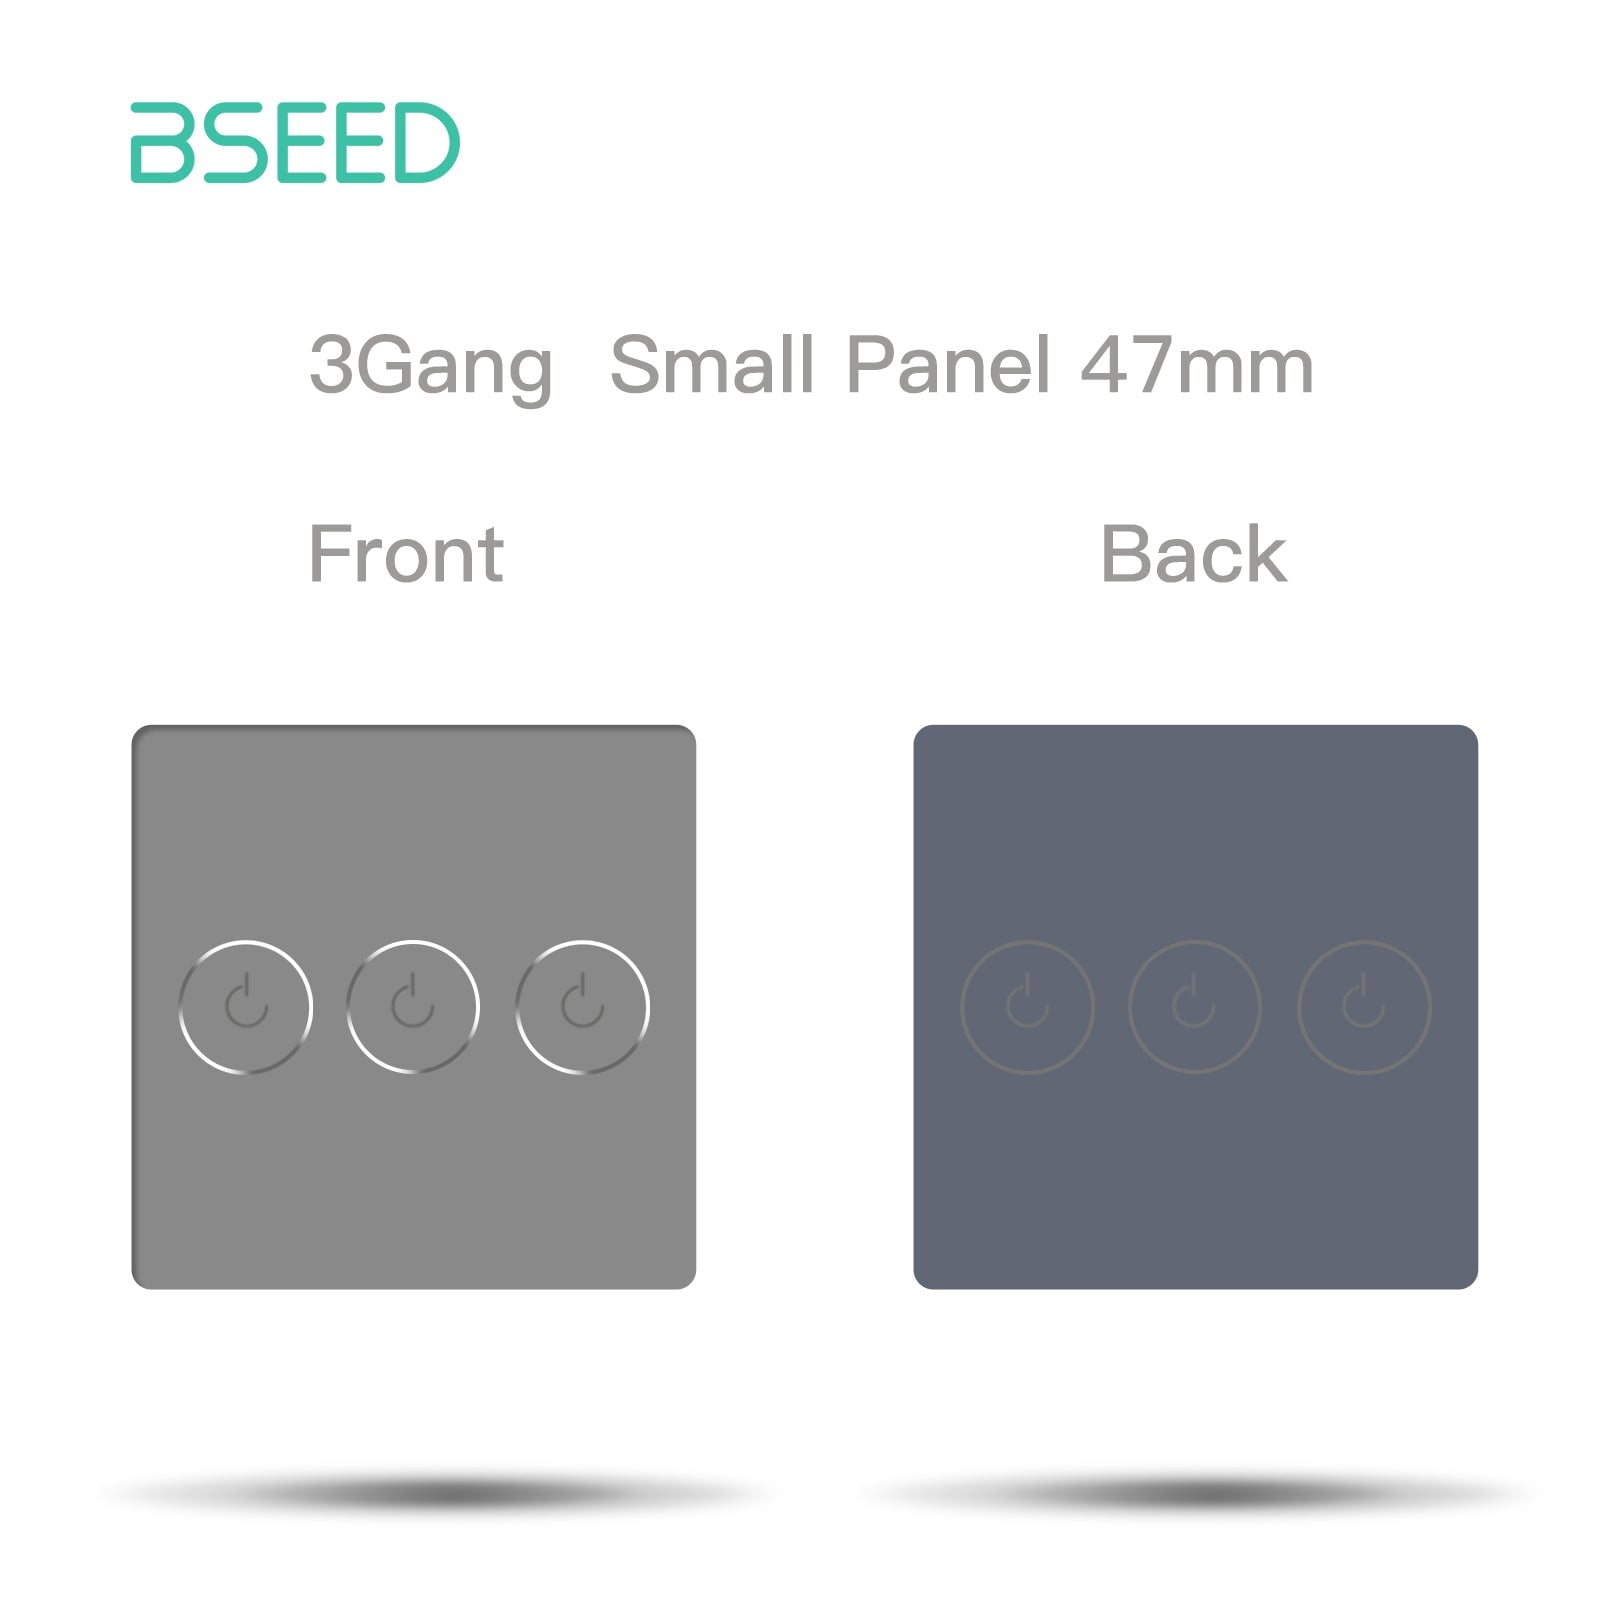 Bseed 47mm Glass Panel Switch DIY Part With Or Without Icon Bseedswitch Grey Wifi 3Gang Switch icon Panel 